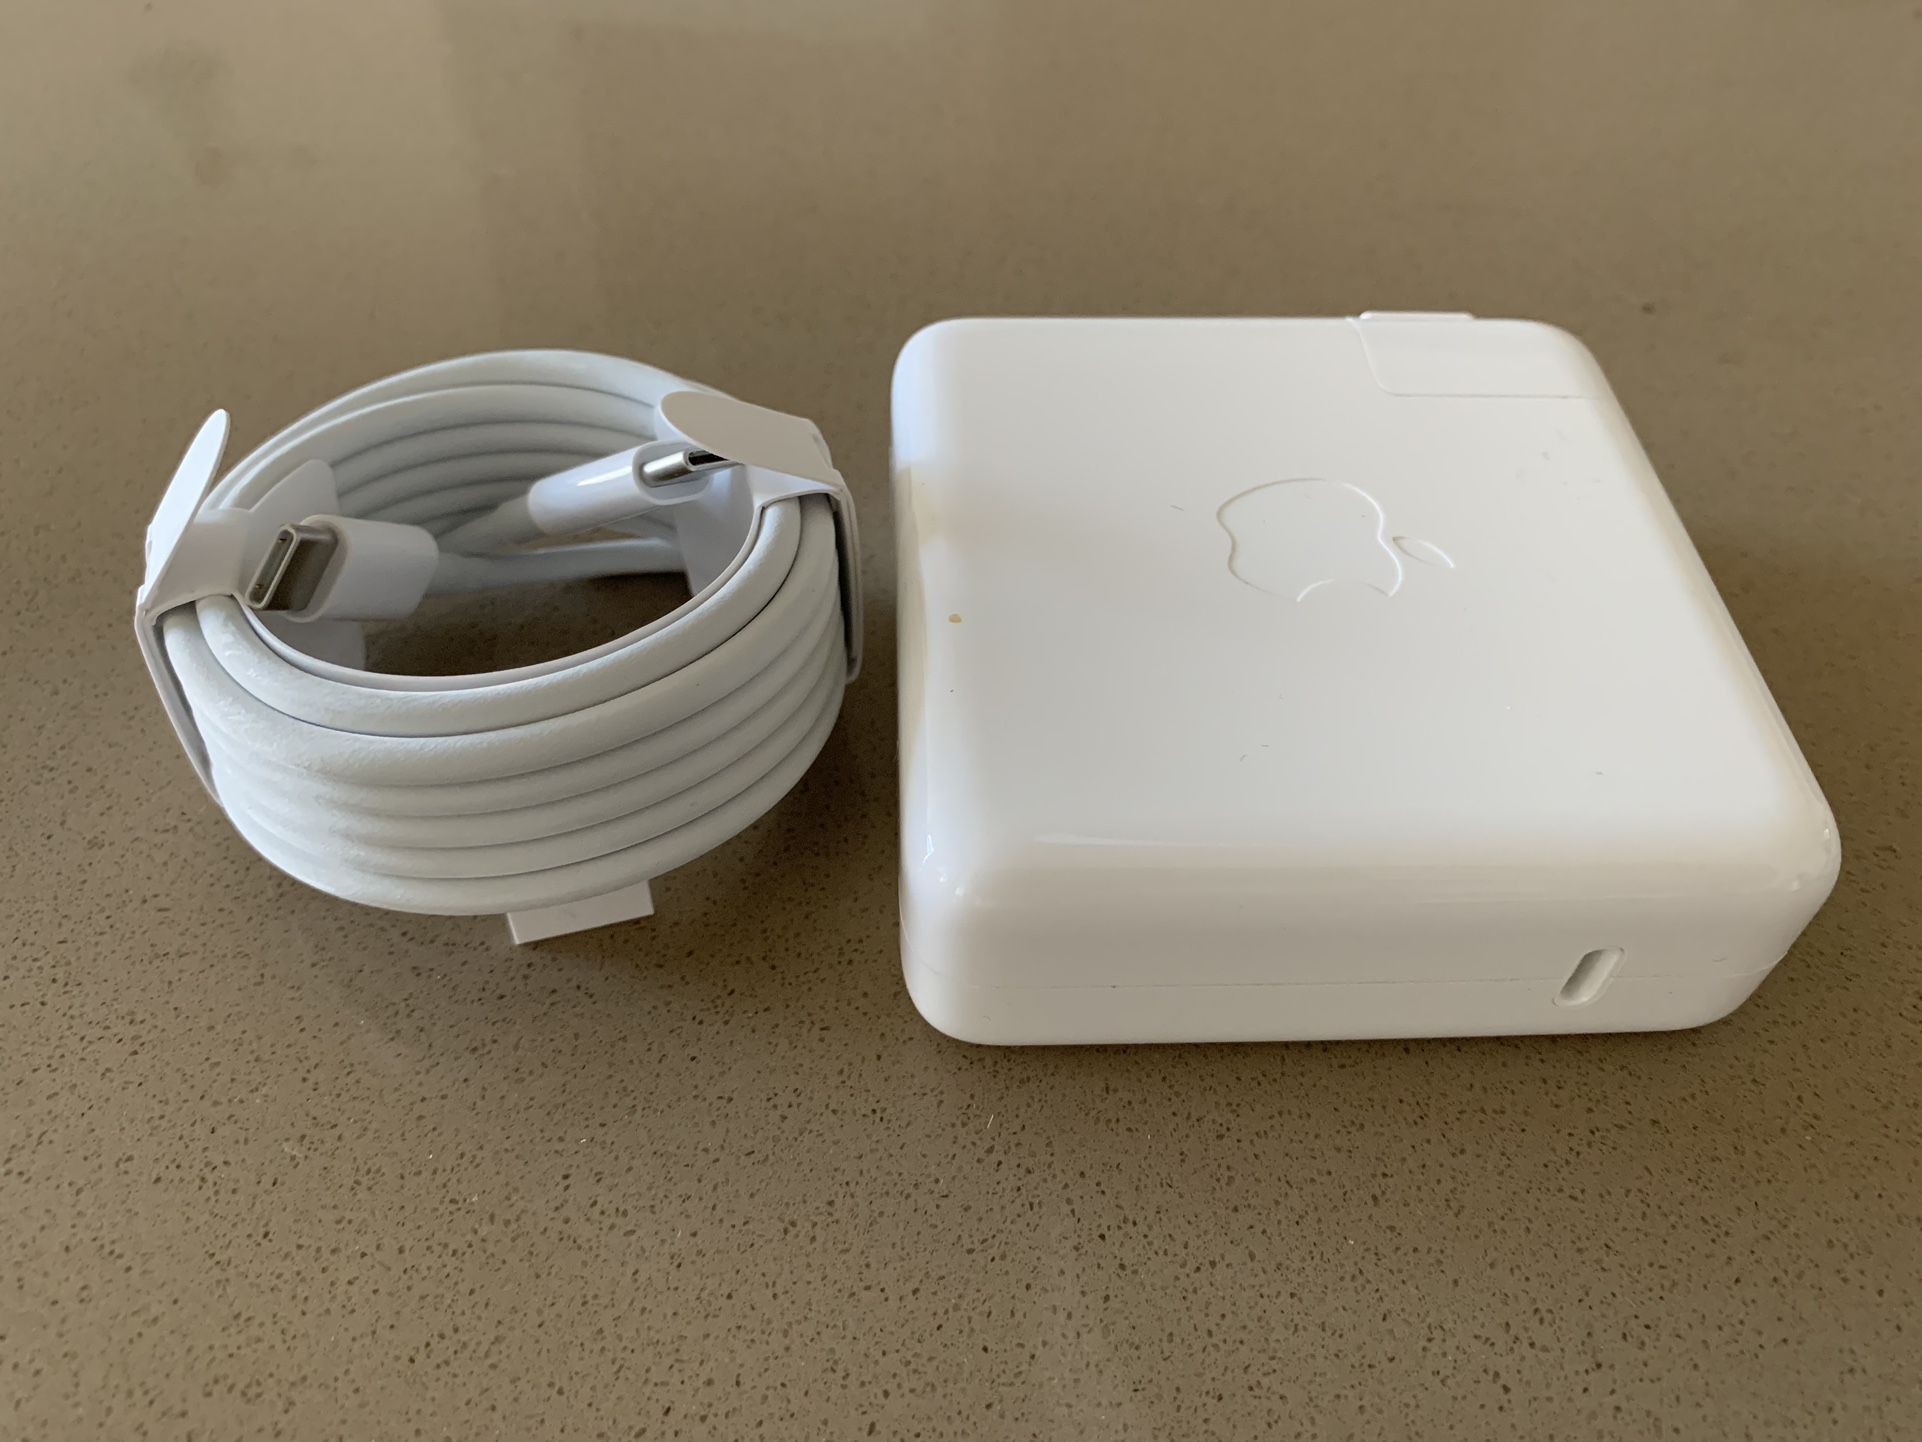 MacBook Pro Charger Brand New